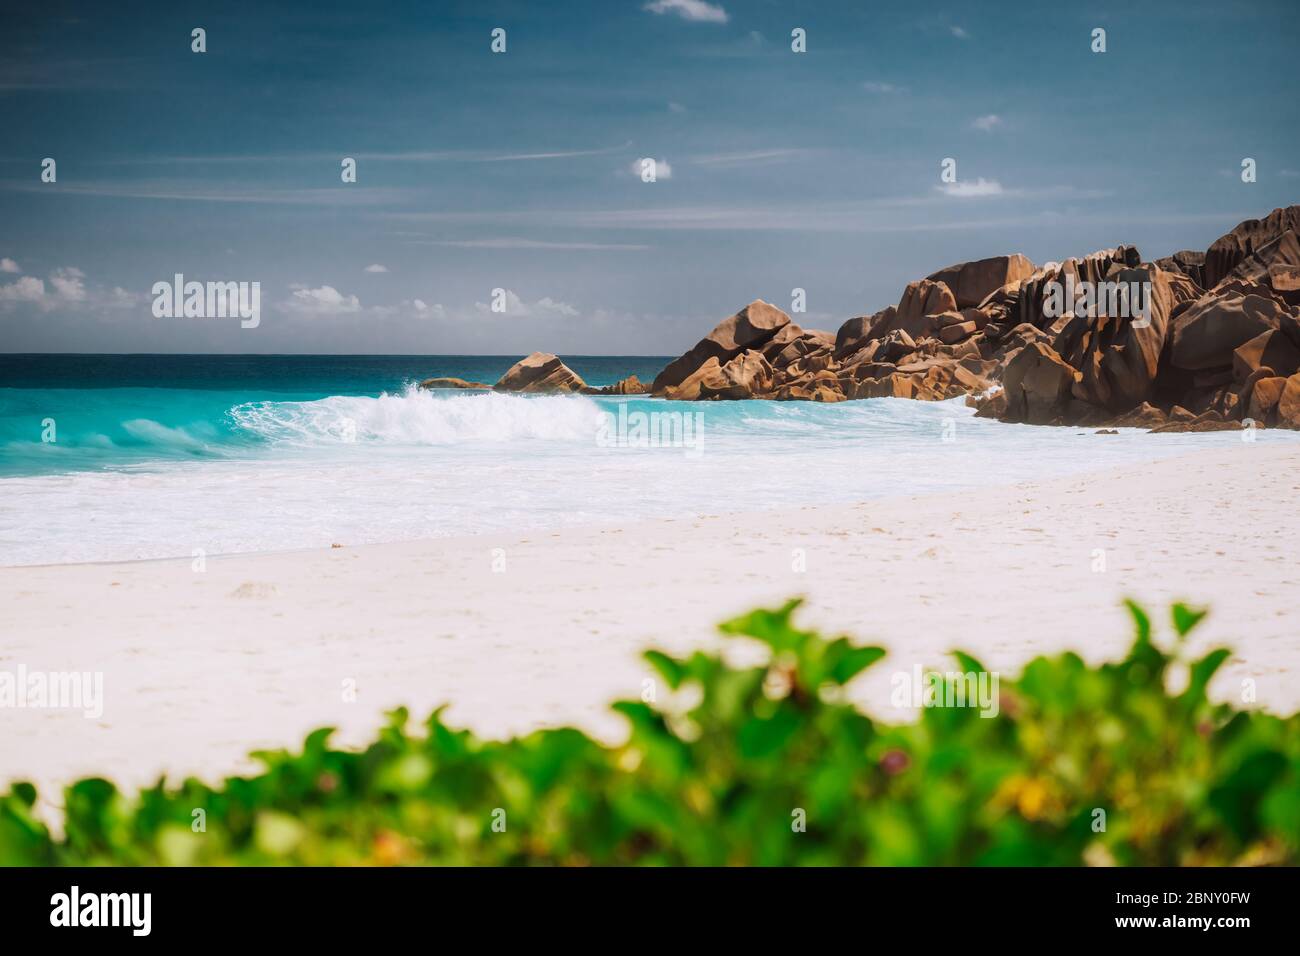 Ocean foamy waves and white sand beach at Petite Anse, La Digue in Seychelles Stock Photo